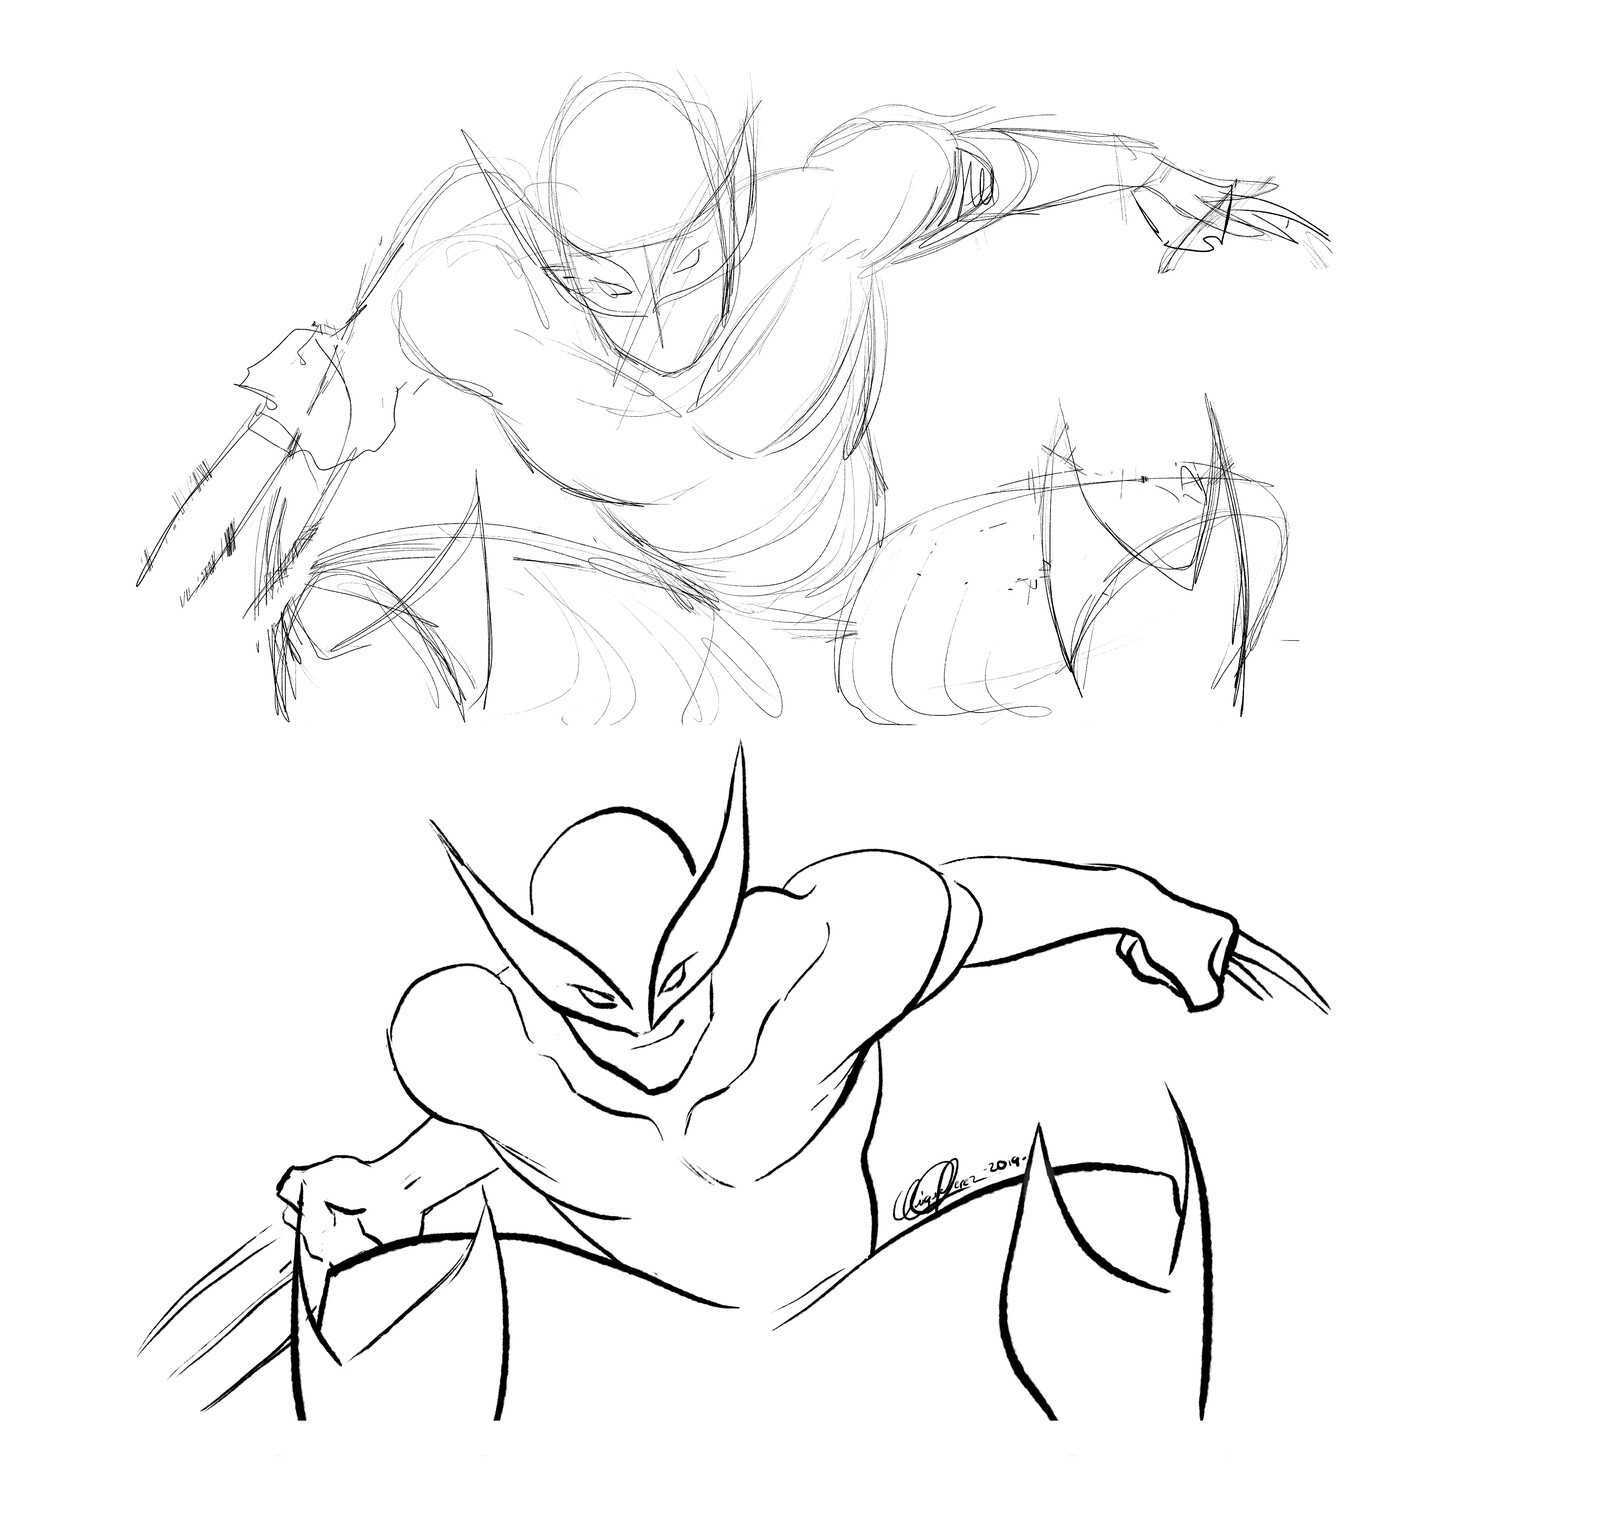 Wolverine '92 style process drawings (2019)